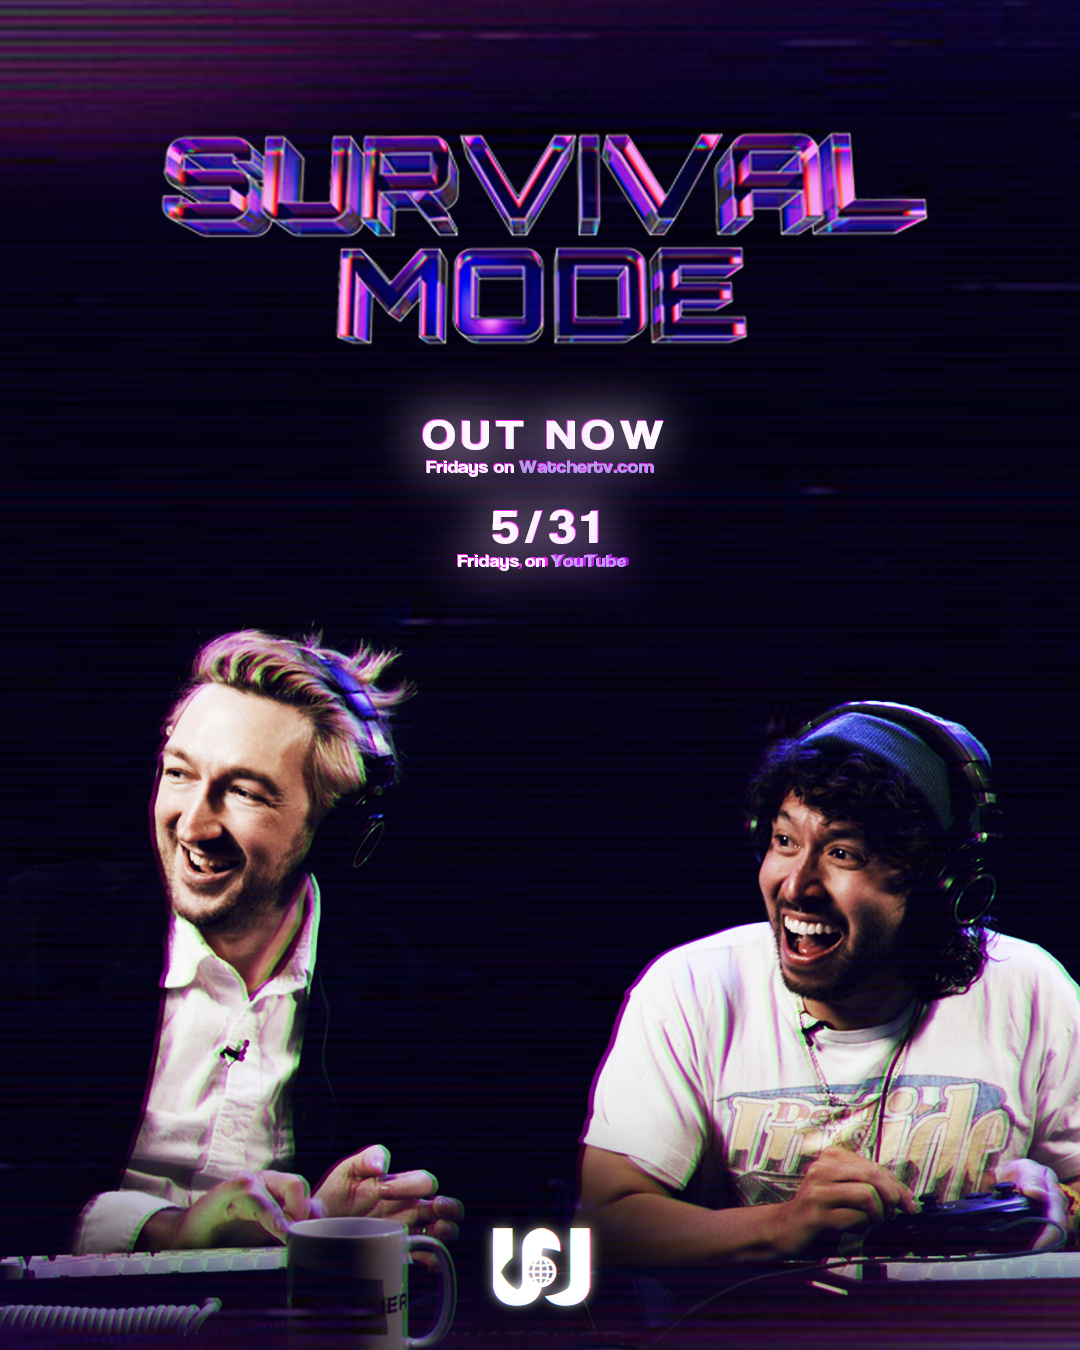 Survival Mode Season 3 is COMING!
Watch trailer now! Or check out the season early on: https://watchertv.com